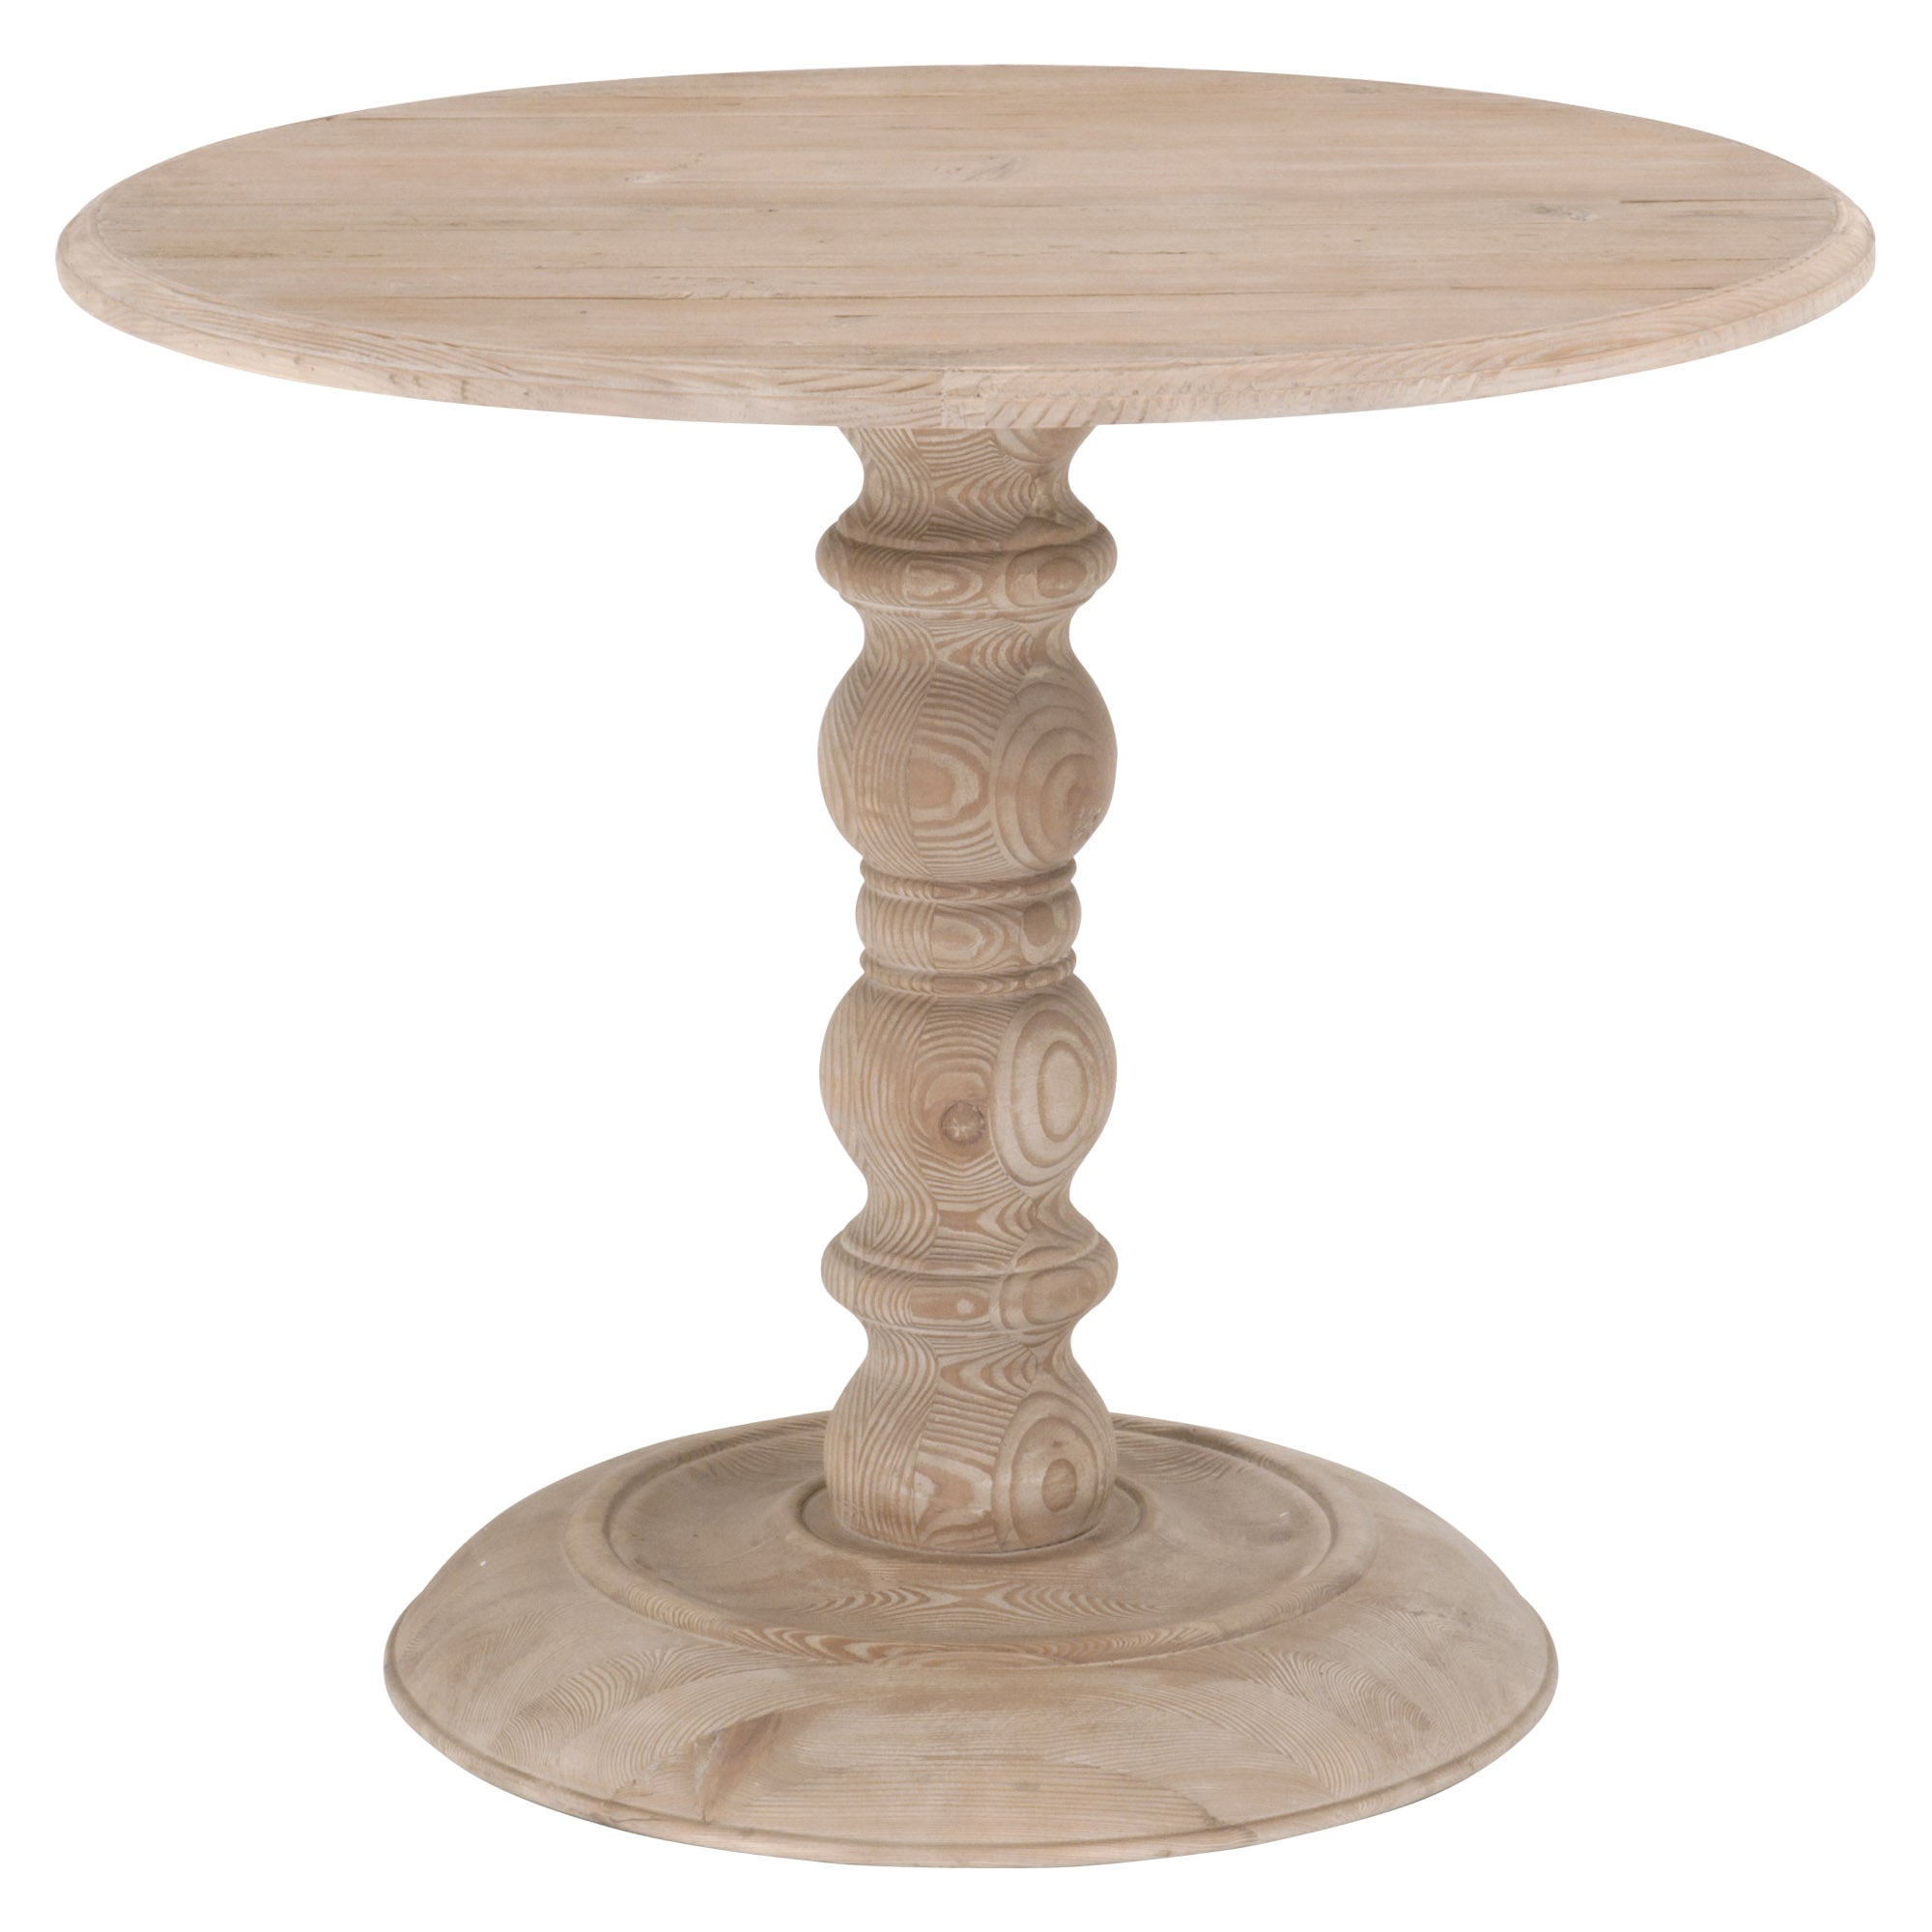 CHELSEA ROUND DINING TABLE